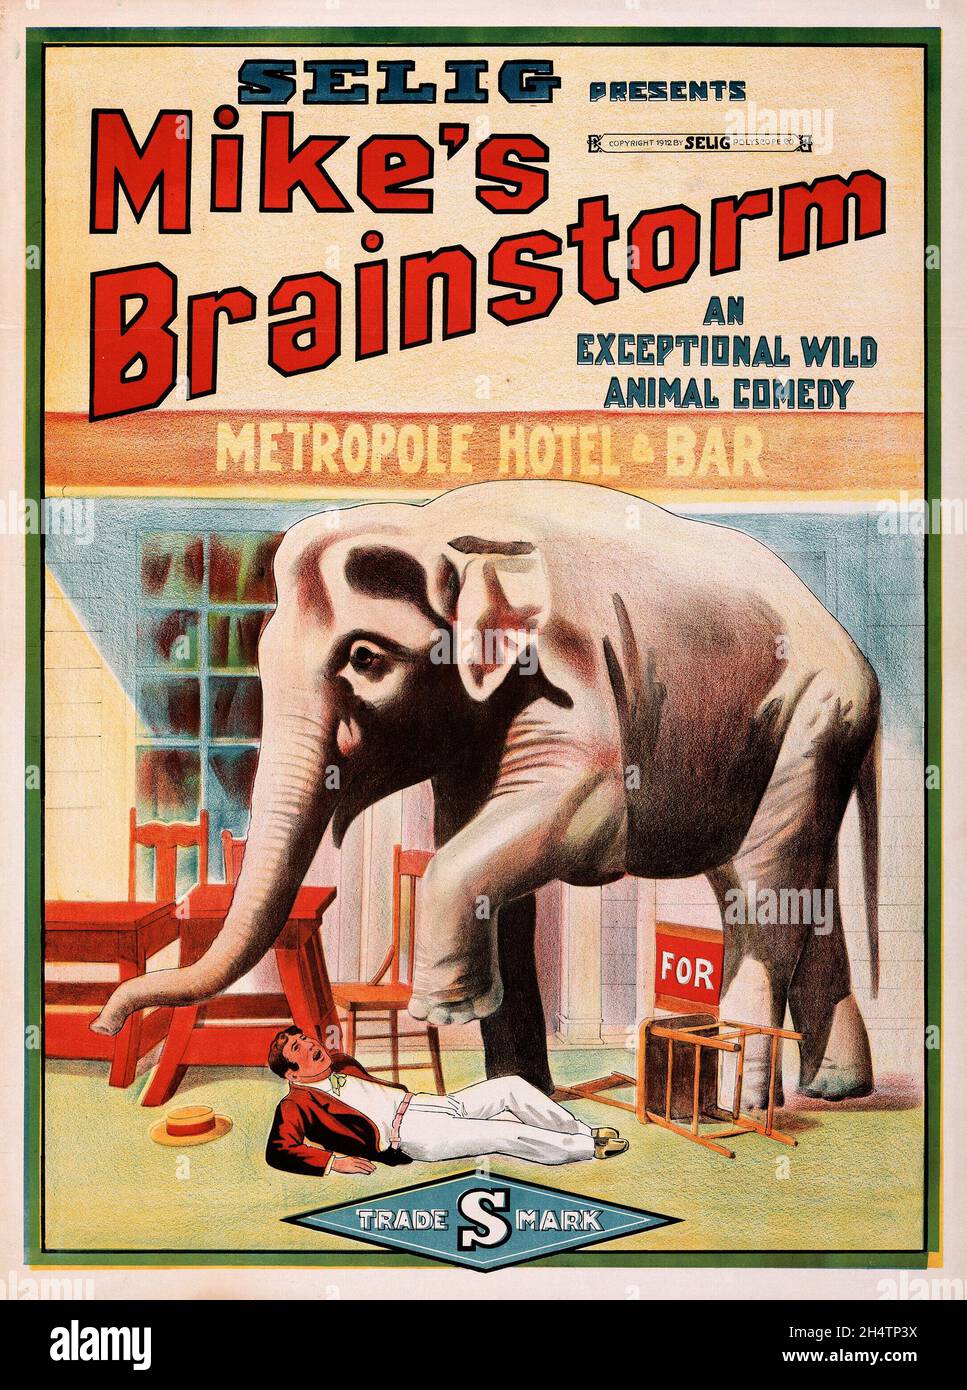 Vintage movie poster - Mike's Brainstorm (Selig, 1912) An exceptional wild animal  comedy Stock Photo - Alamy